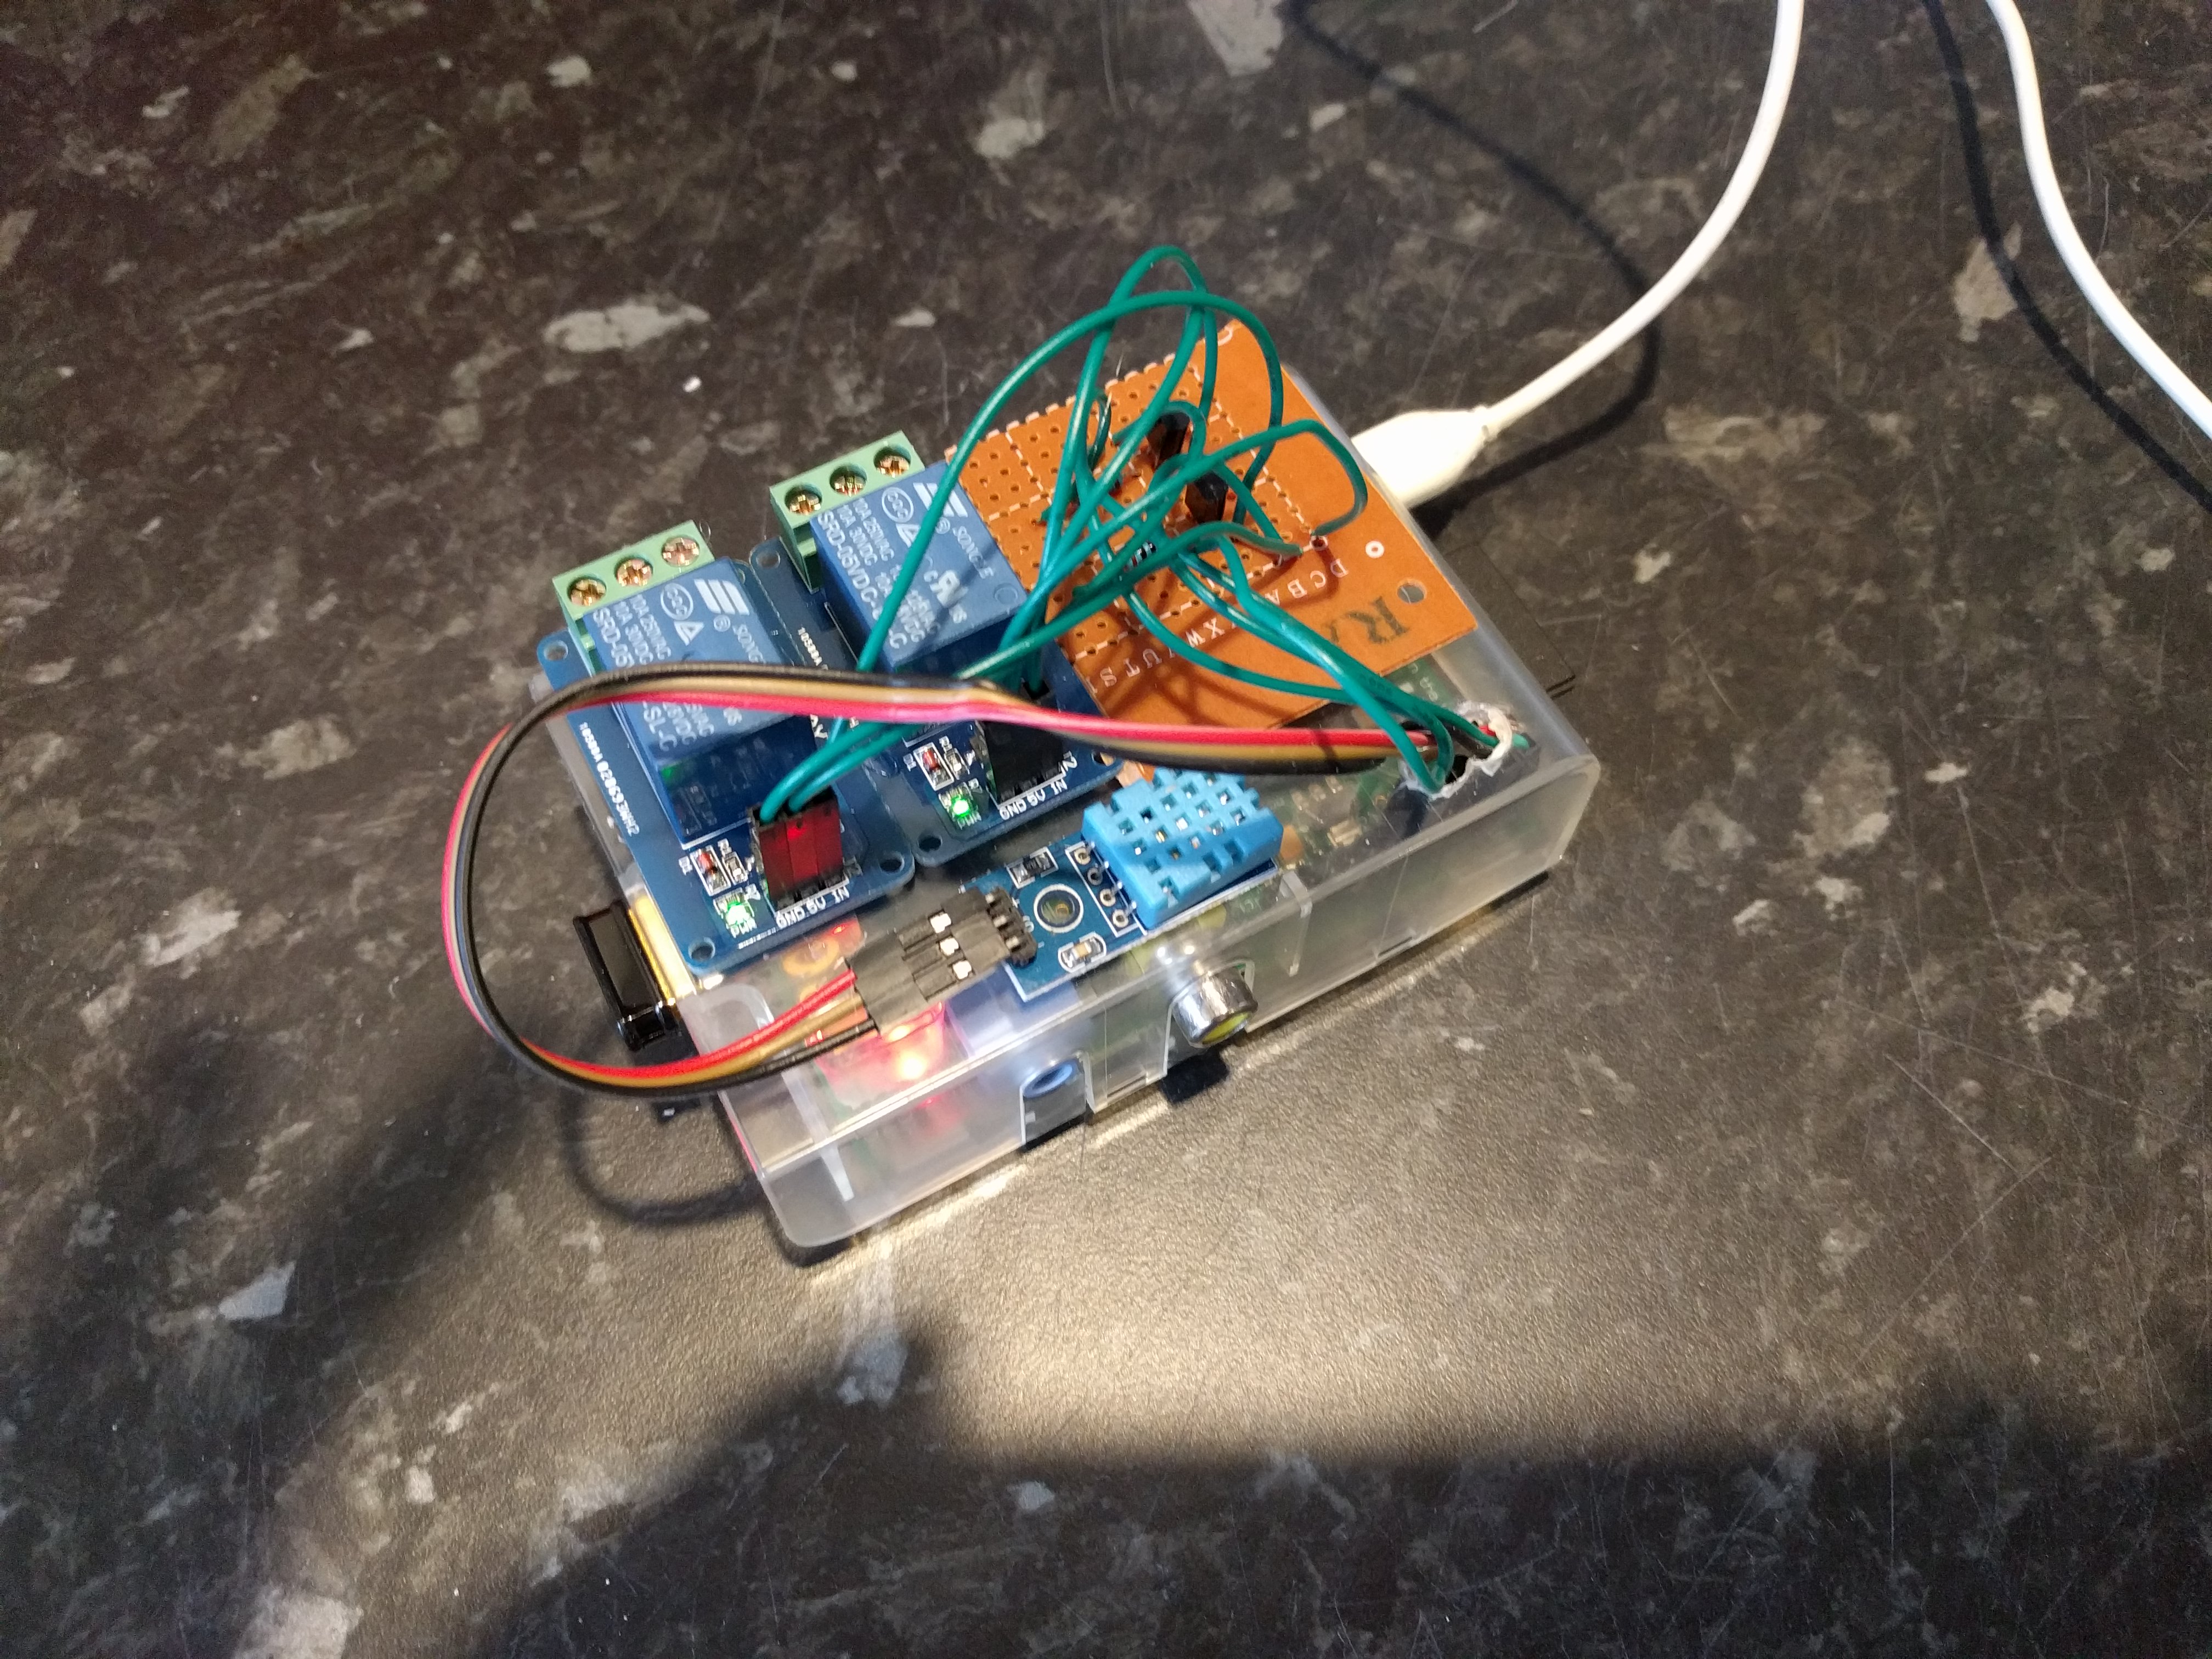 The Raspberry Pi with the relay assembly